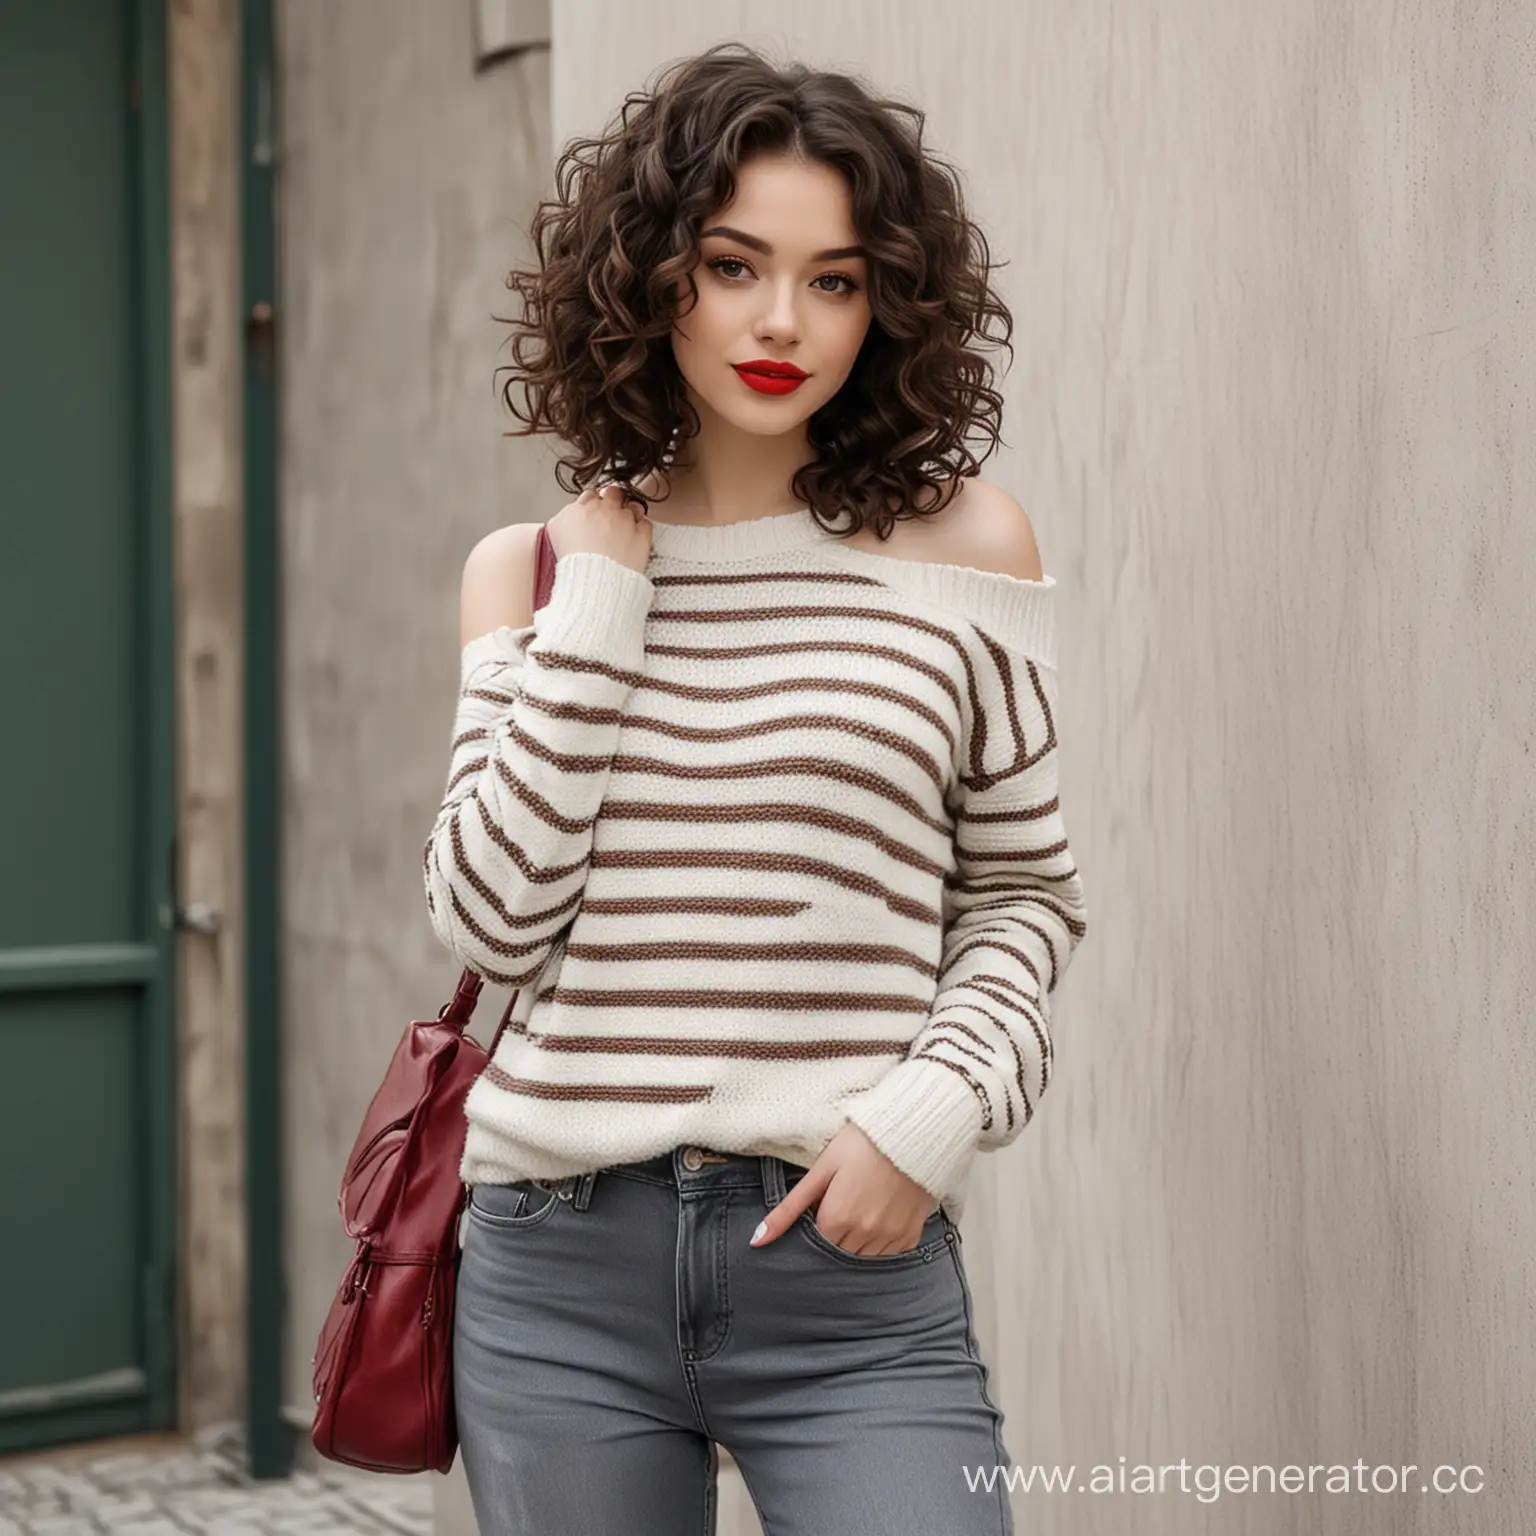 Stylish-Young-Woman-with-Bold-Red-Lips-and-Curled-Brown-Hair